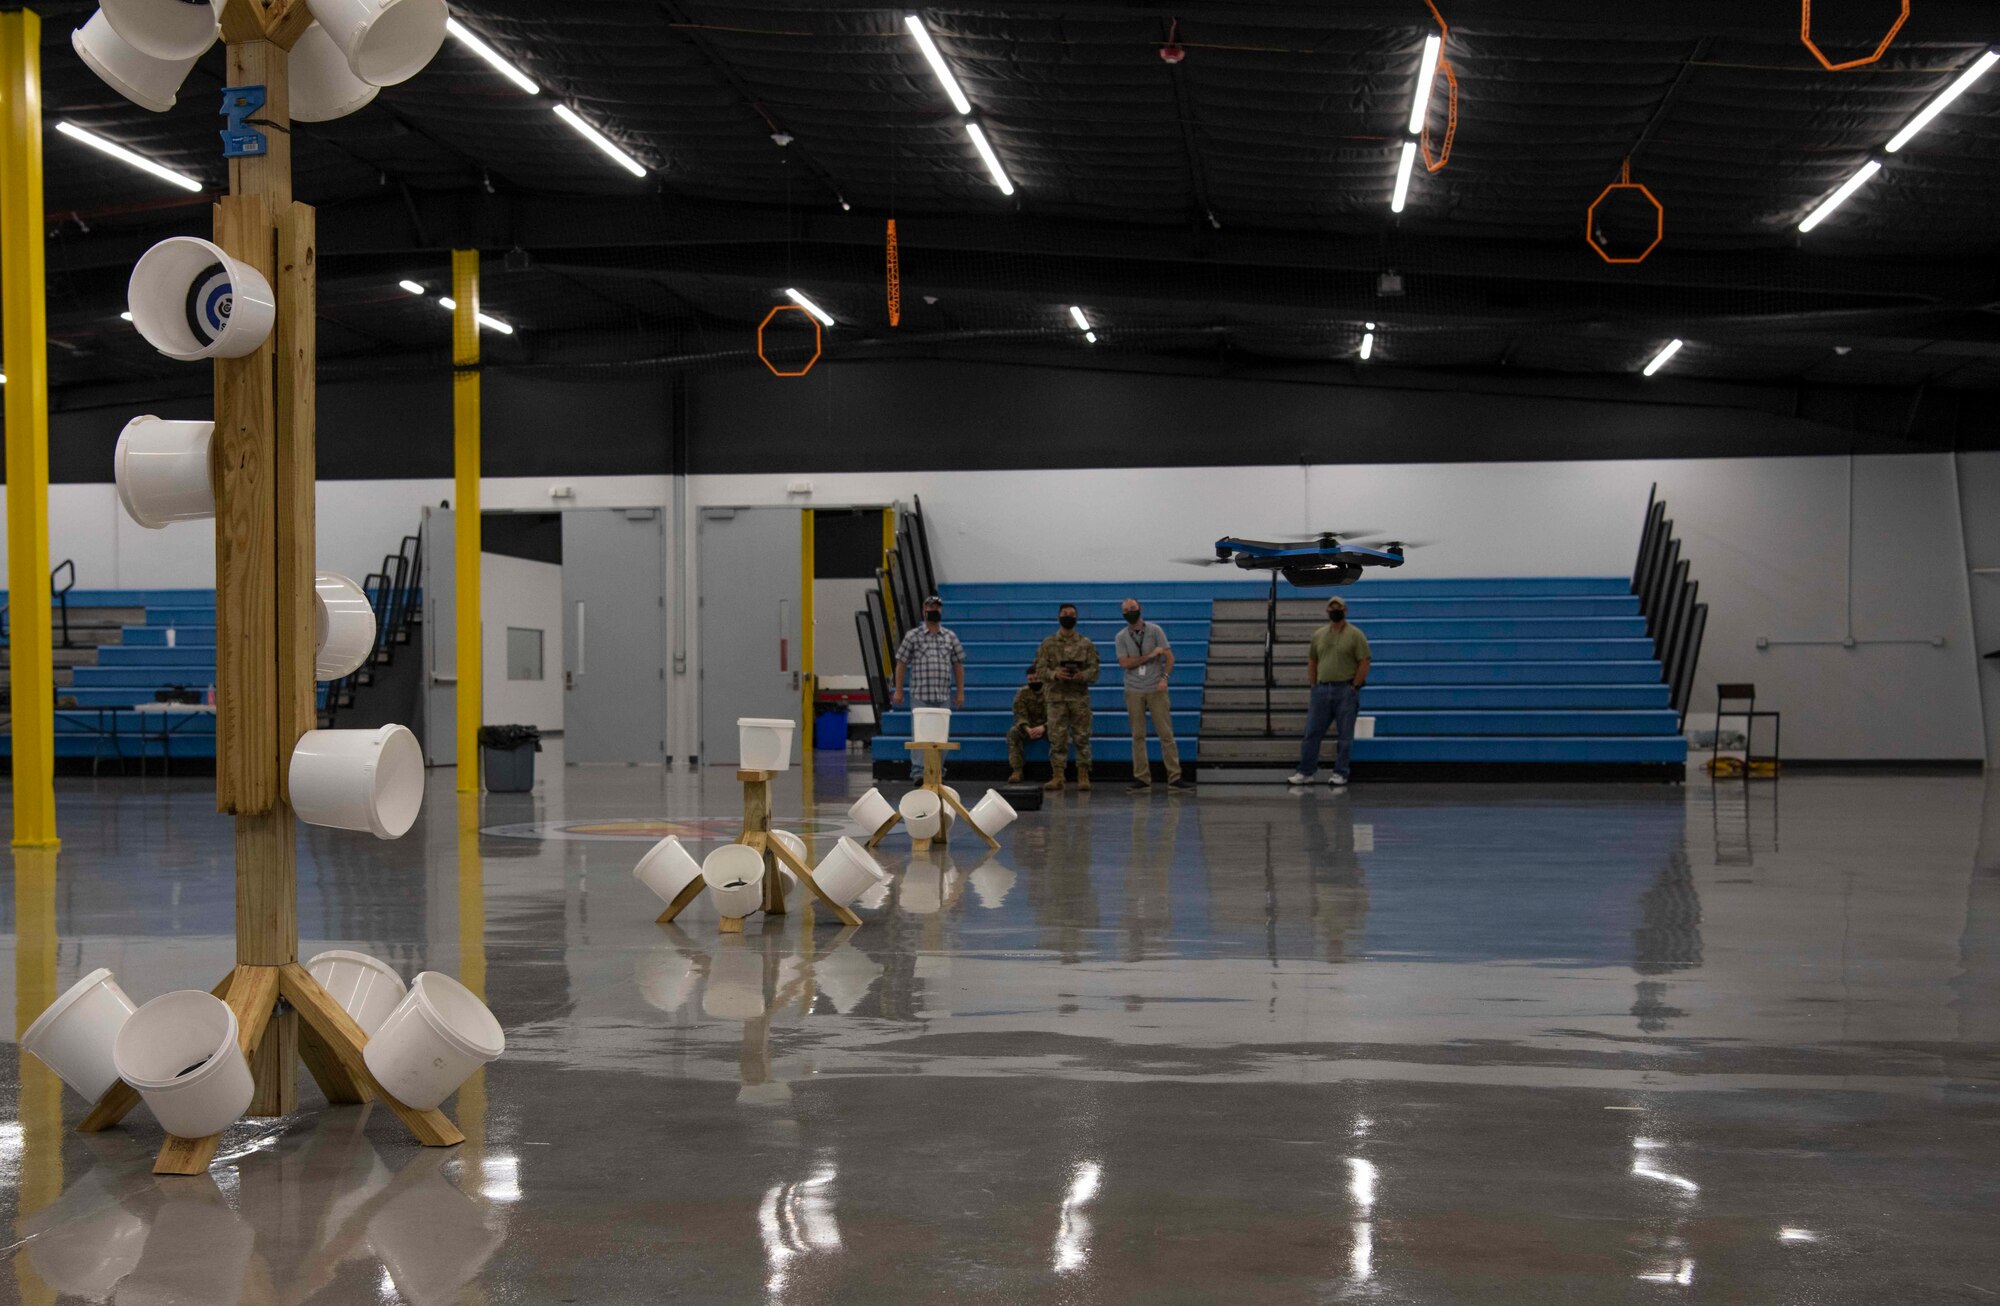 Members of the 1st Special Operations Civil Engineer Squadron learn how to fly an unmanned aircraft system at the FieldWerx Makerspace in Fort Walton Beach, Florida, April 6, 2021.